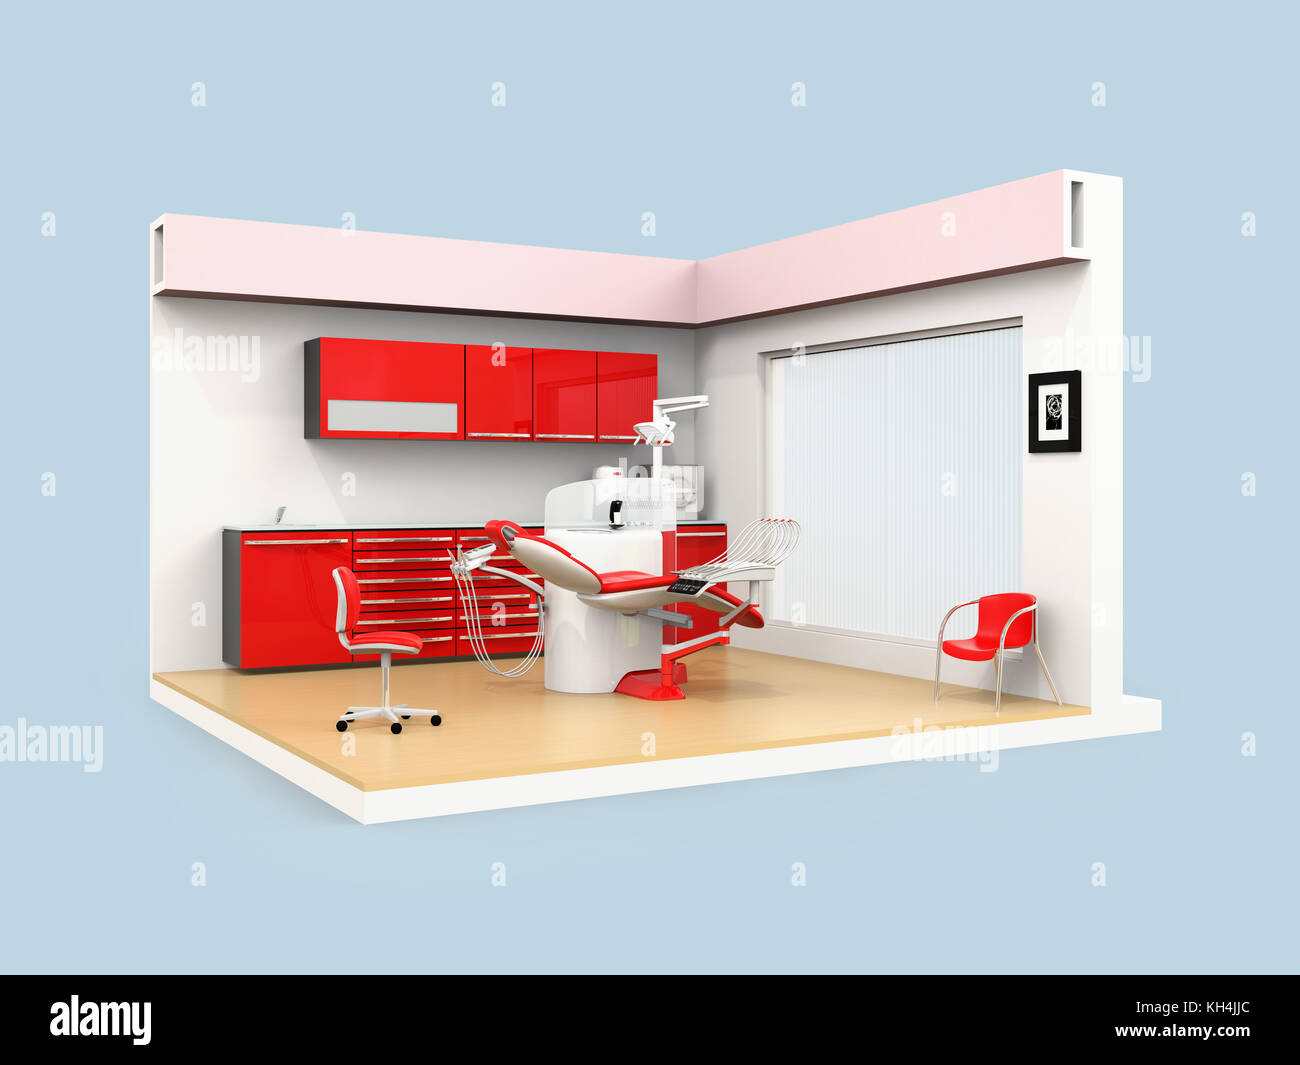 Dental Clinic Interior With Dental Chair And Cabinet 3d